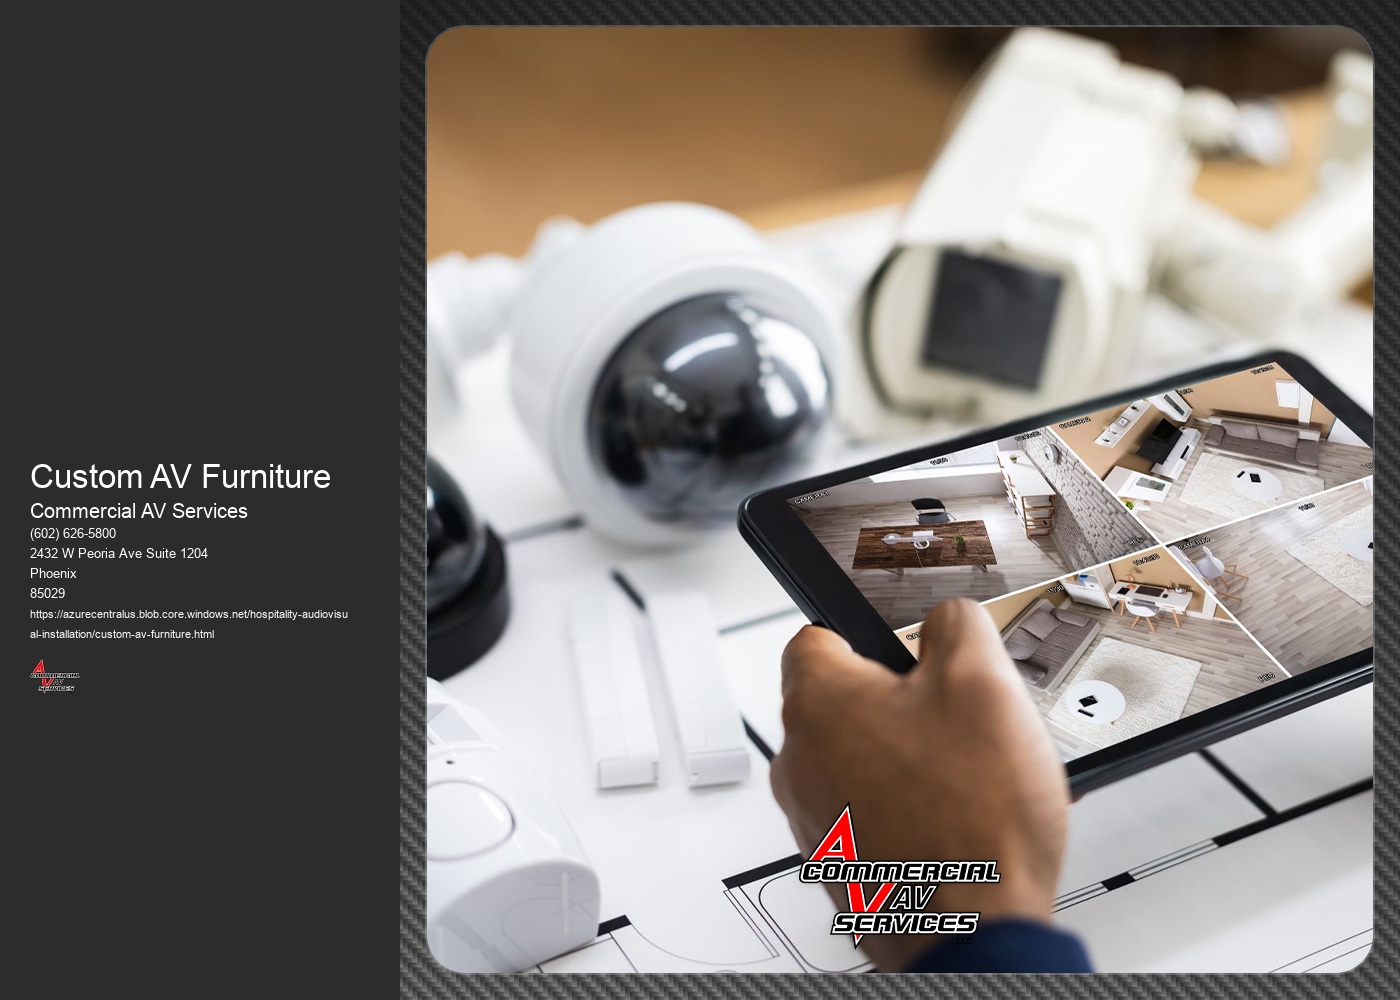 How does the customization process work for custom AV furniture, from initial design consultation to final installation?